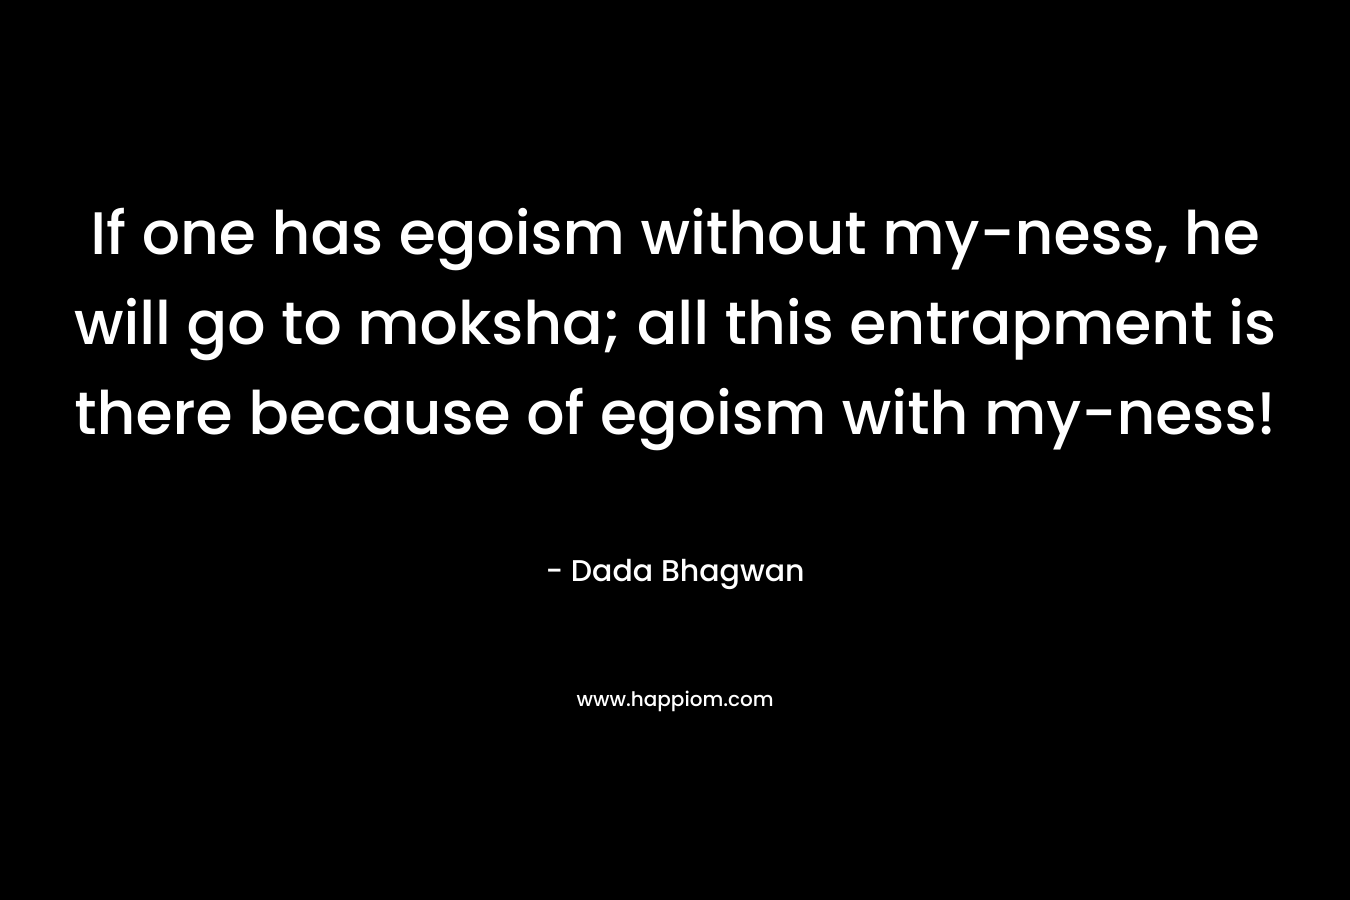 If one has egoism without my-ness, he will go to moksha; all this entrapment is there because of egoism with my-ness! – Dada Bhagwan